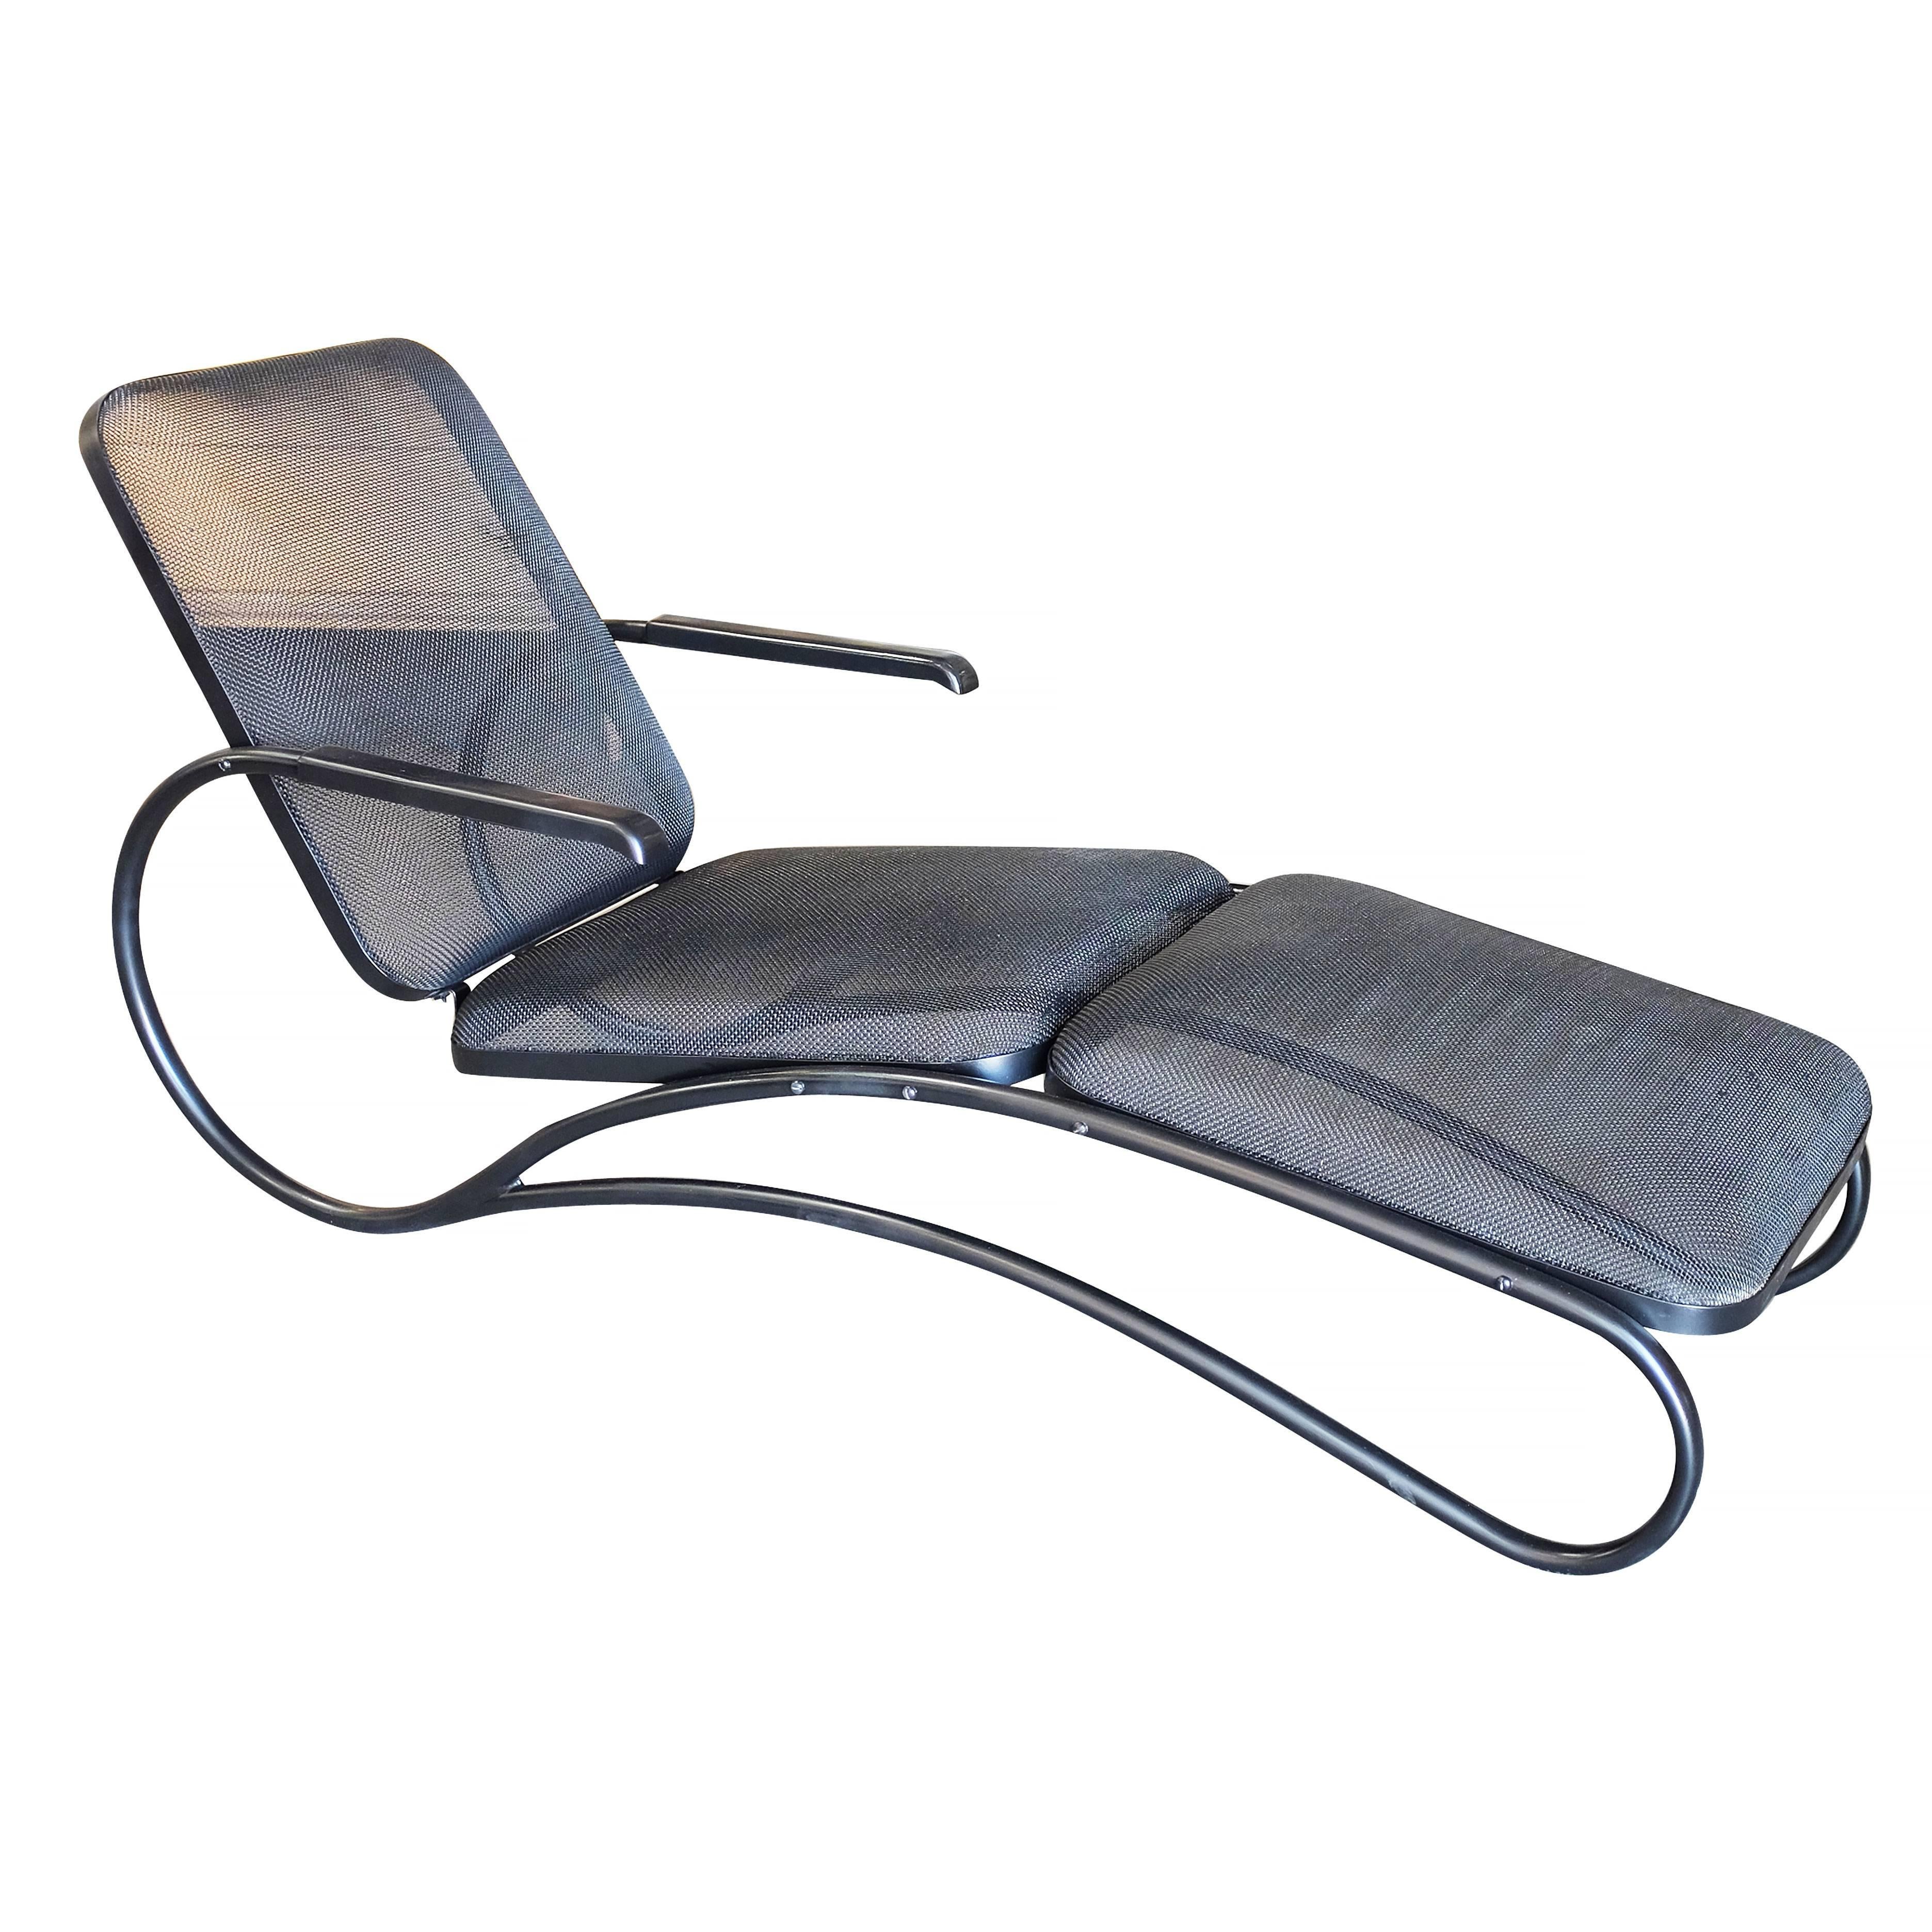 Rare midcentury spring mesh outdoor/patio chaise longue with spring mesh seat and flowing sculptural tubular arms.